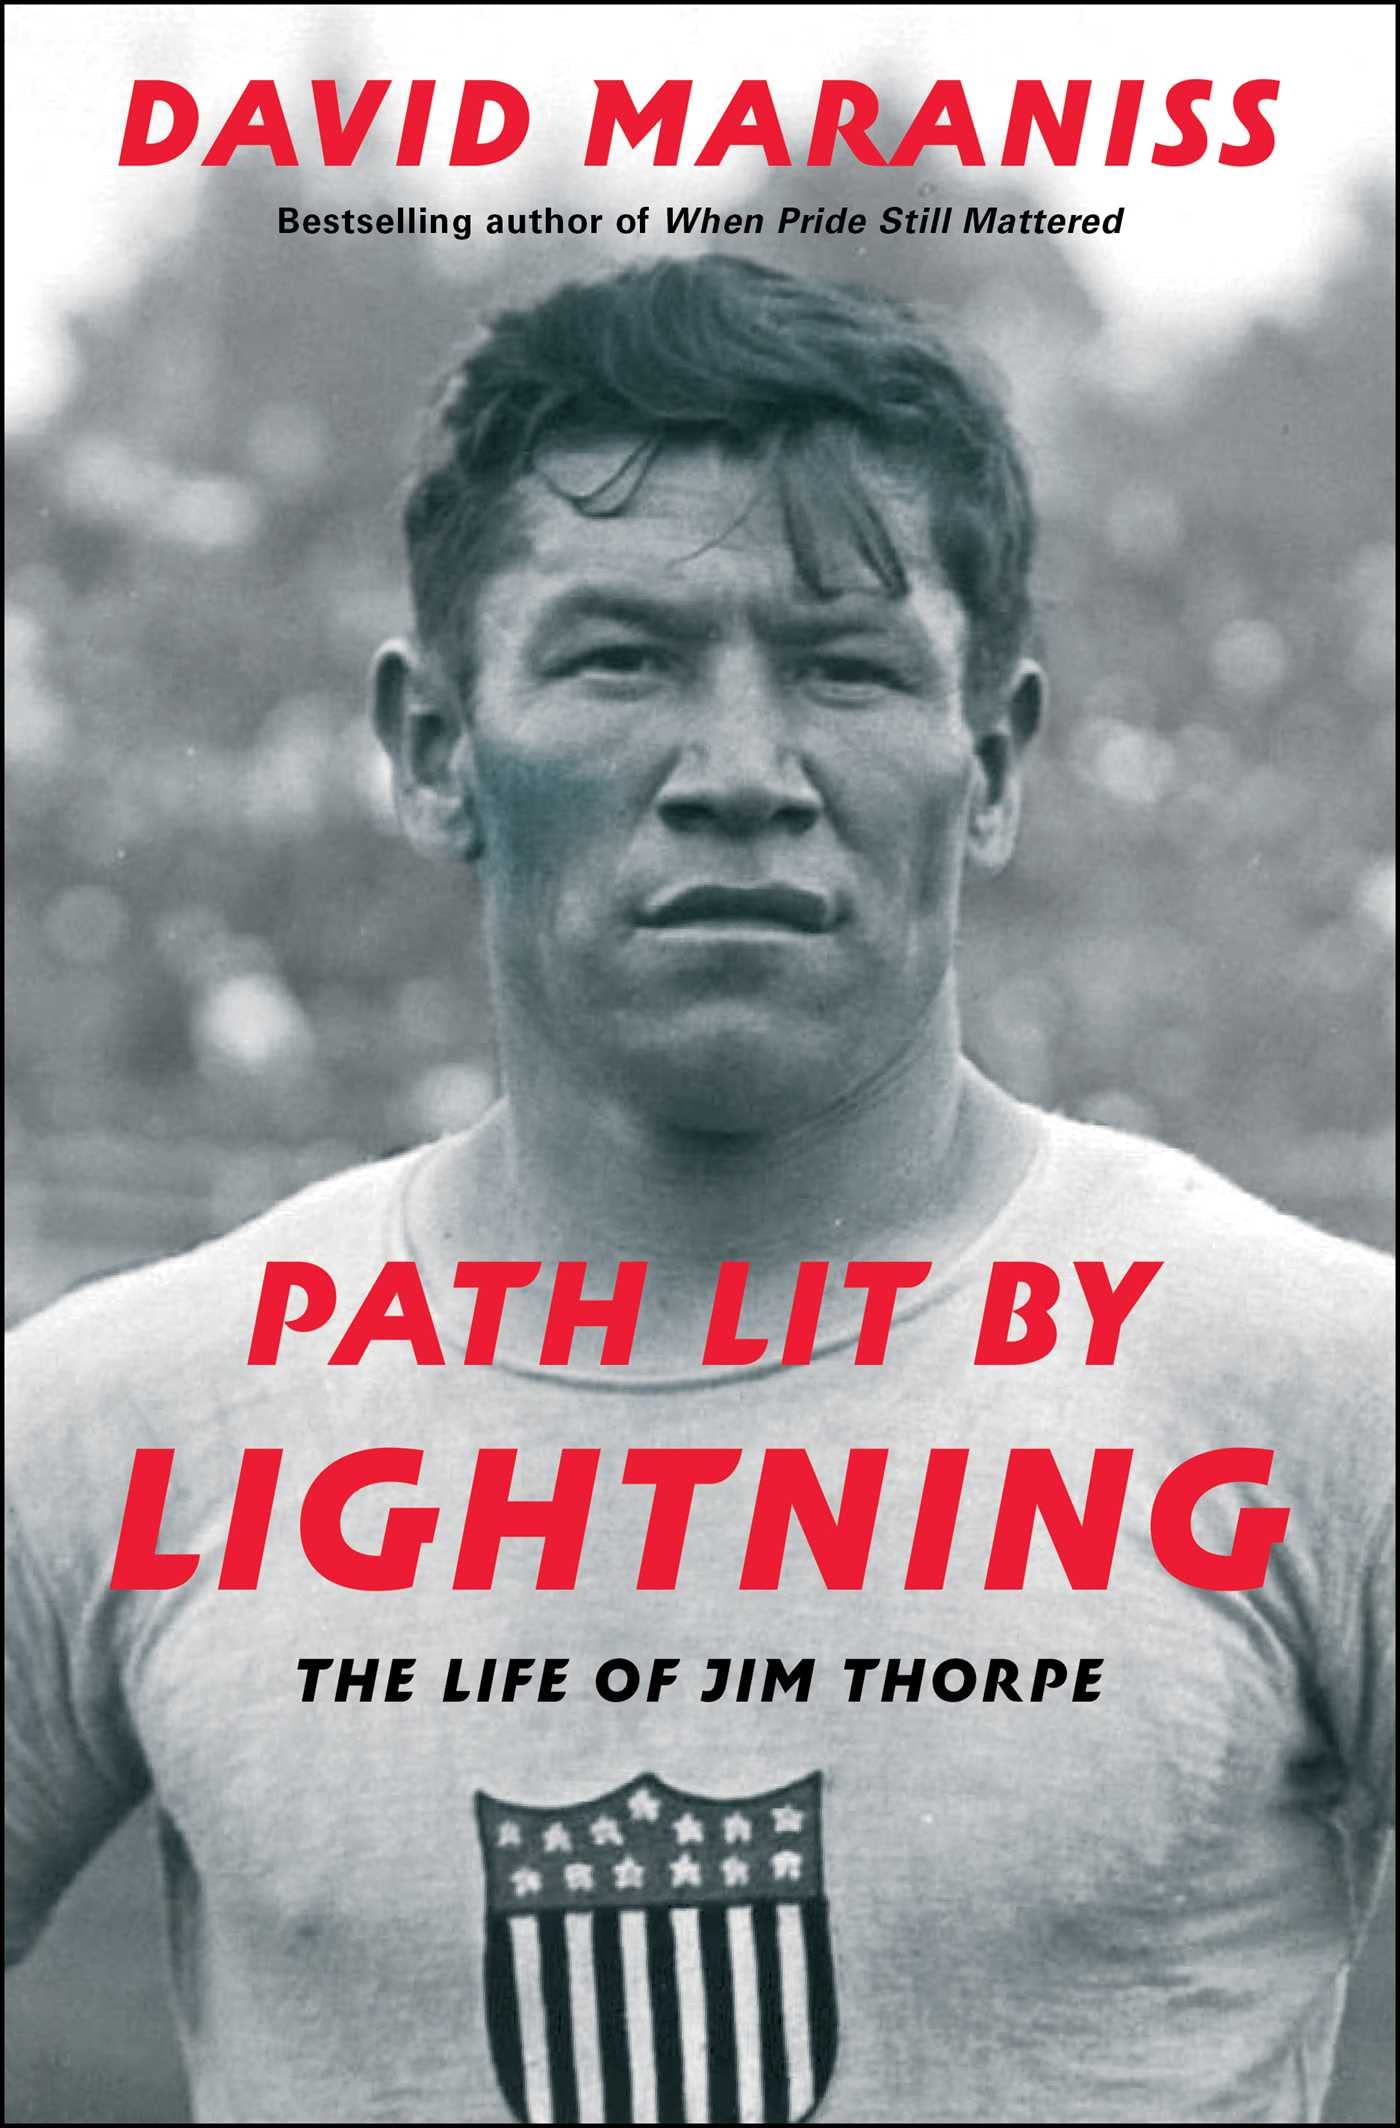 Image for "Path Lit by Lightning"